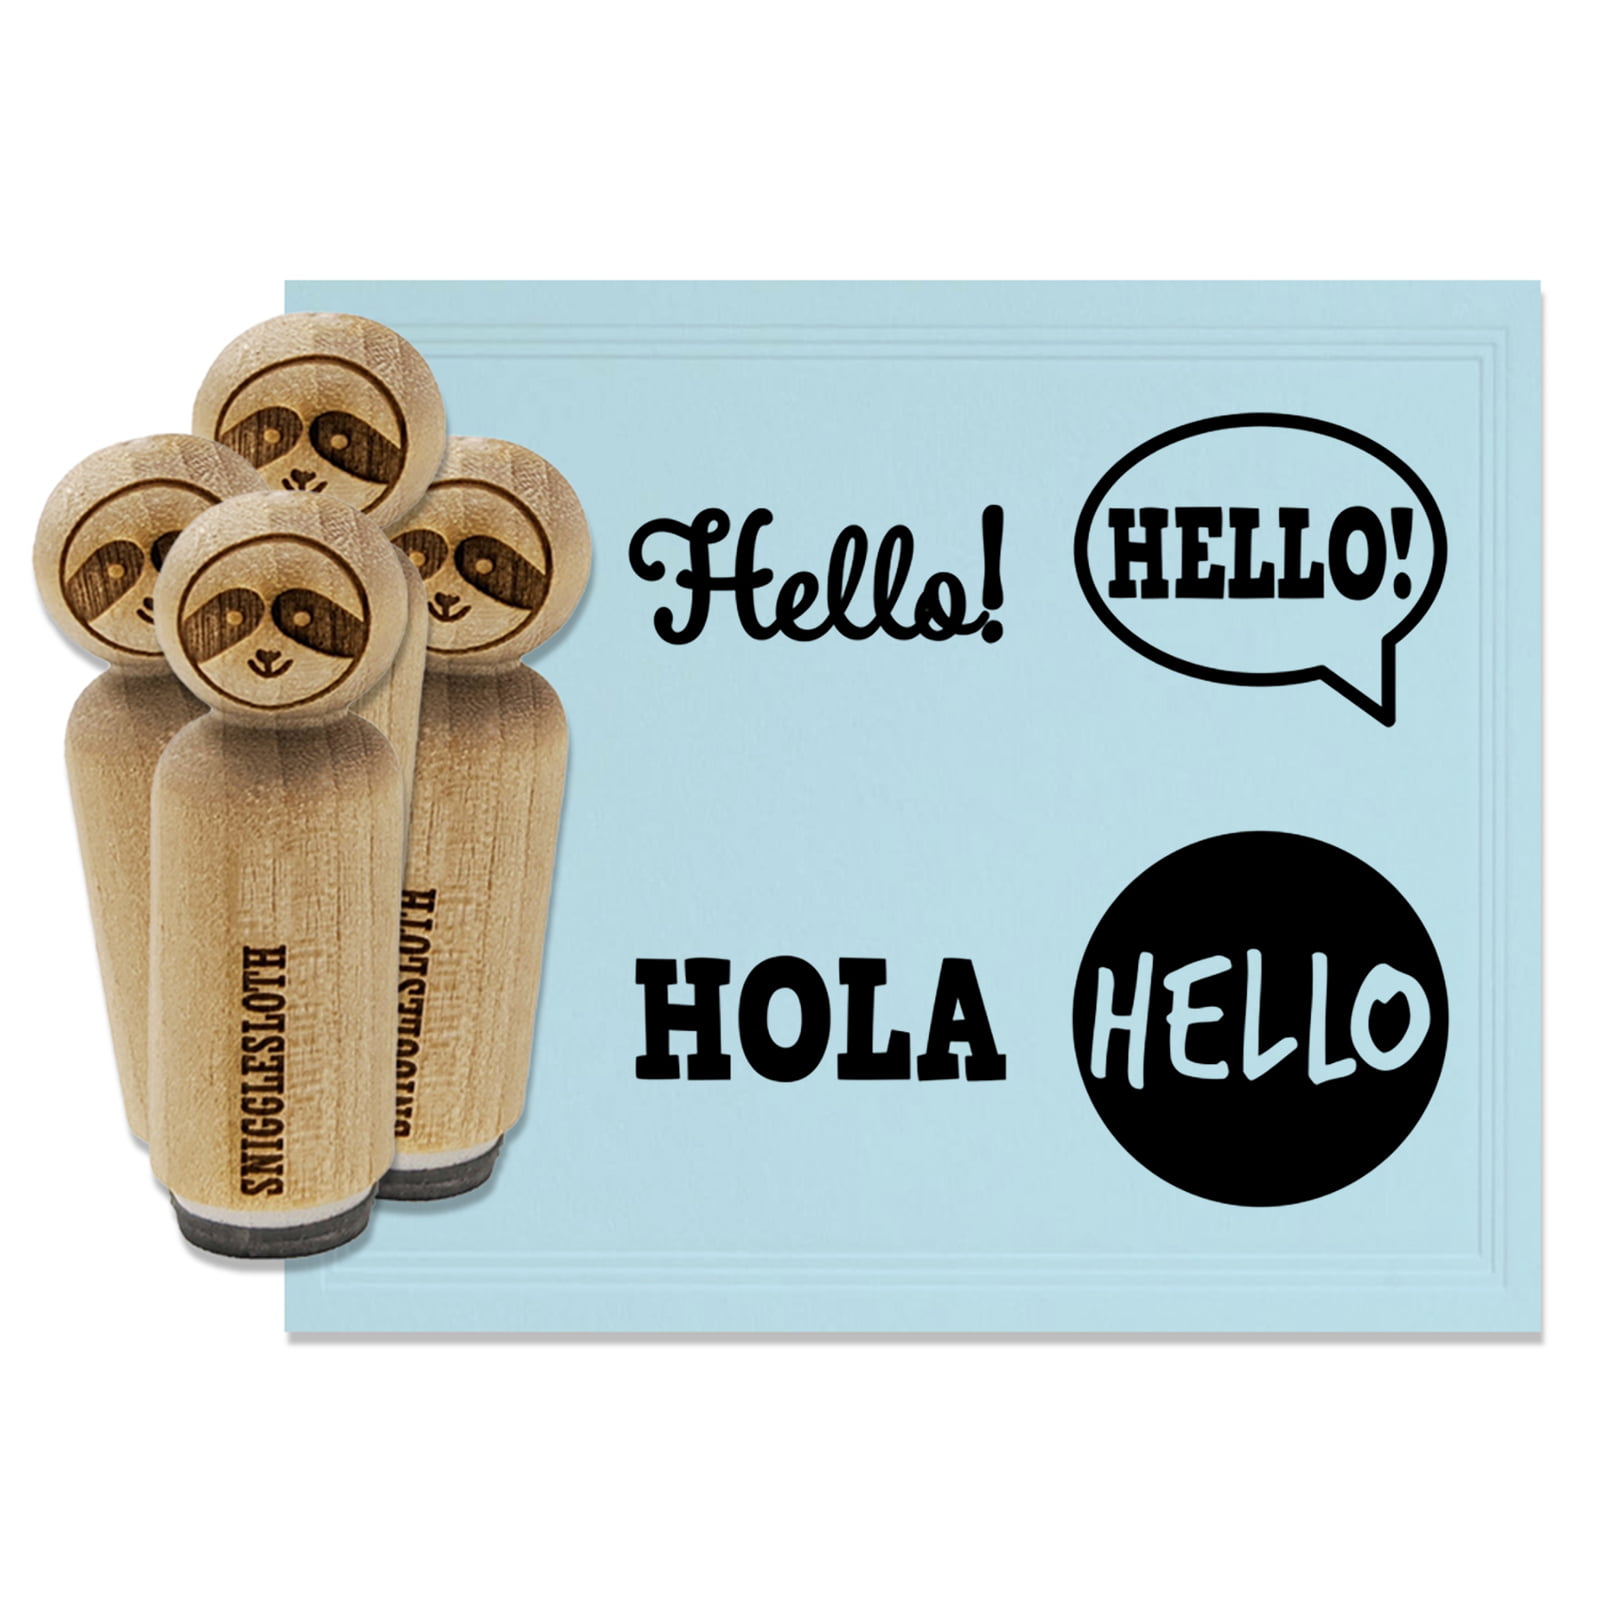 Hello Text Cursive English Hola Spanish Hi Greeting Rubber Stamp Set for  Scrapbooking Crafting Stamping - Large 1-1/4 Inch 